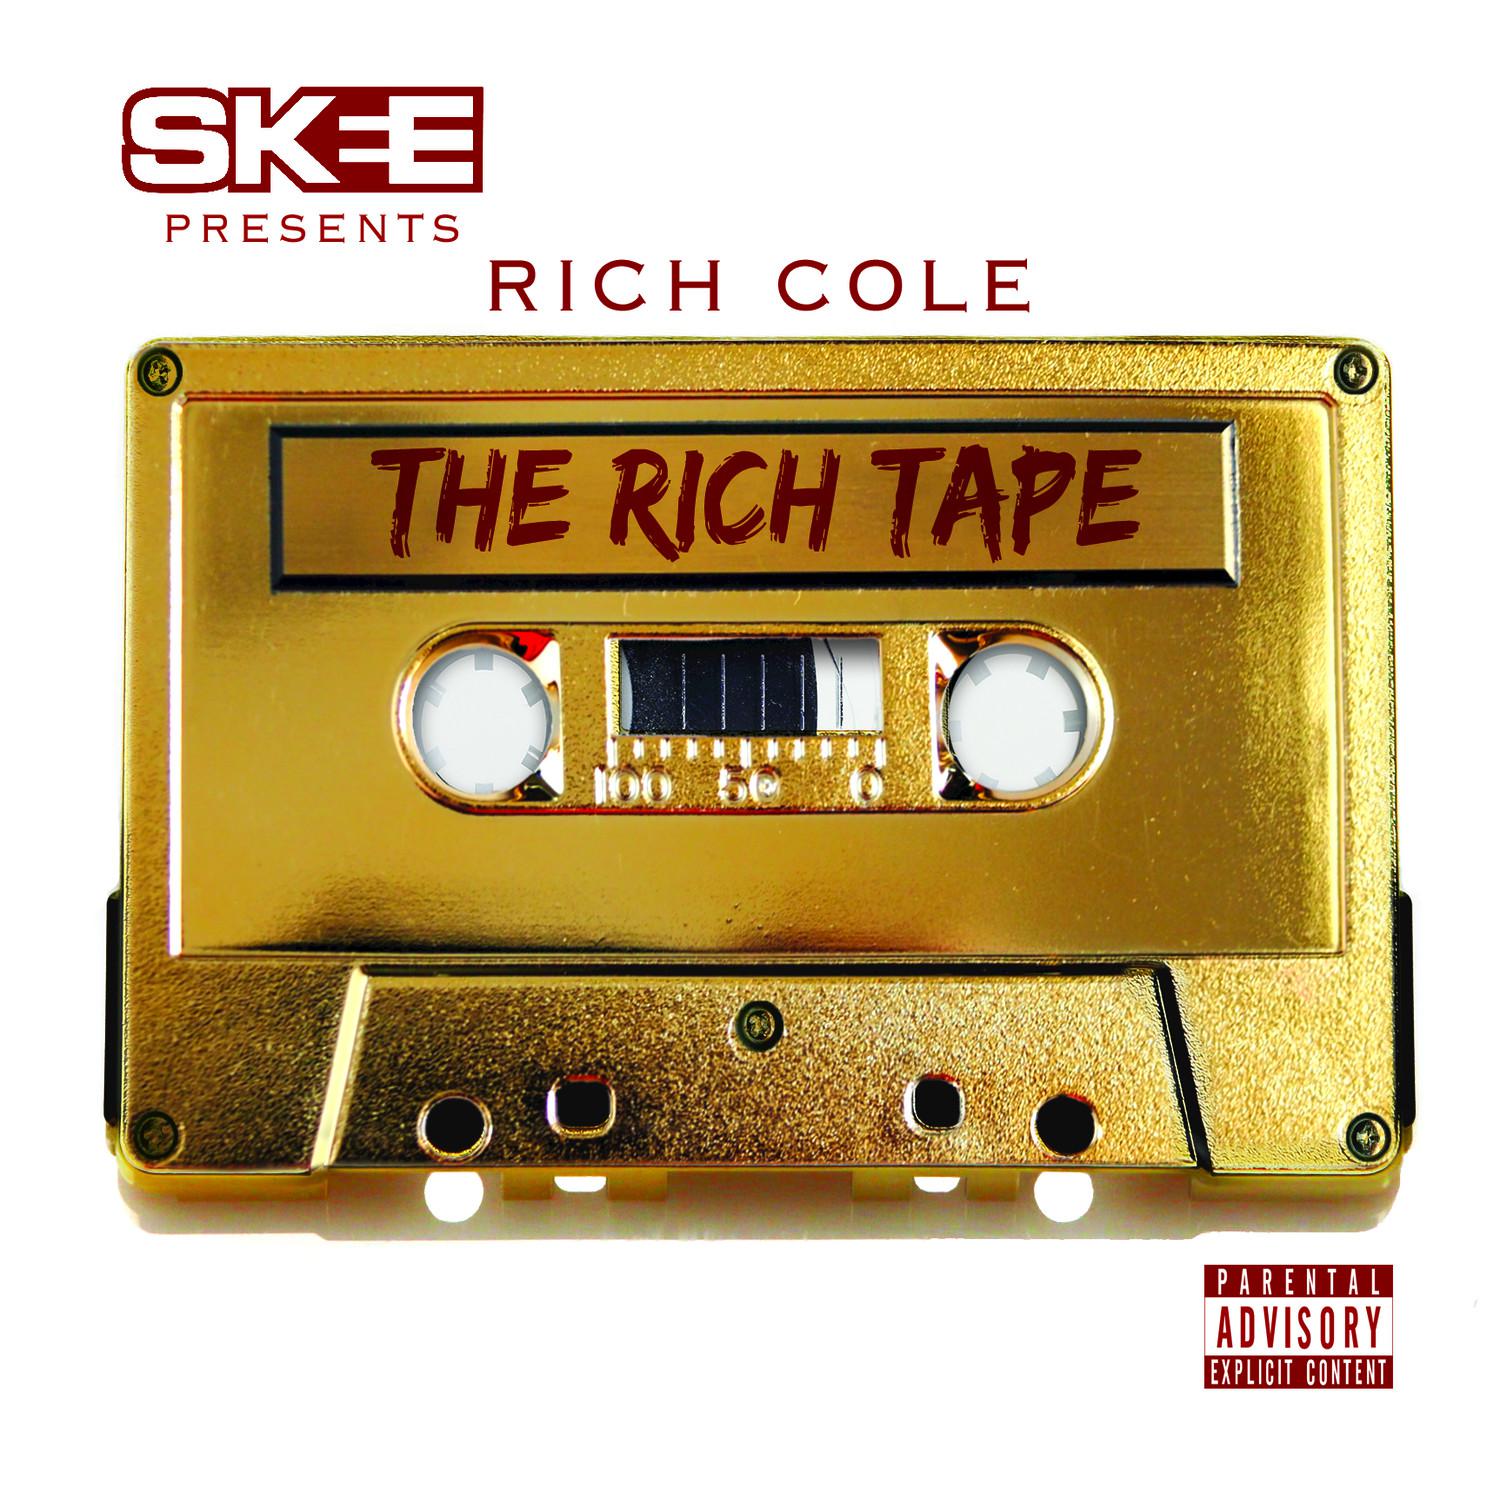 The Rich Tape